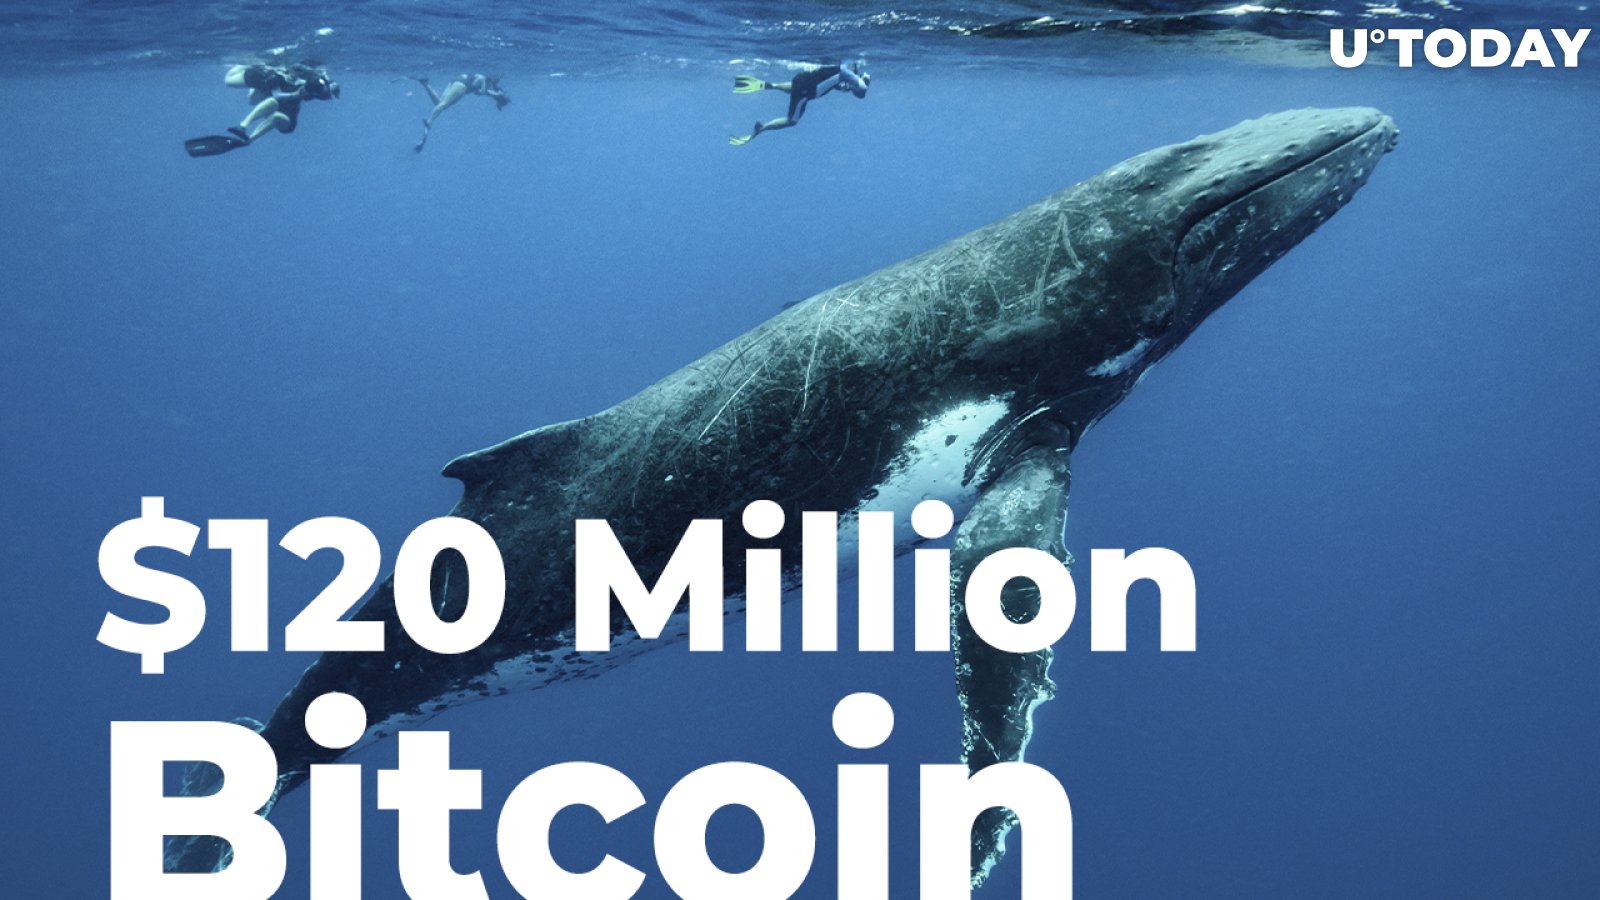 Anonymous Whale Suddenly Closes $120 Million Bitcoin Short on Market